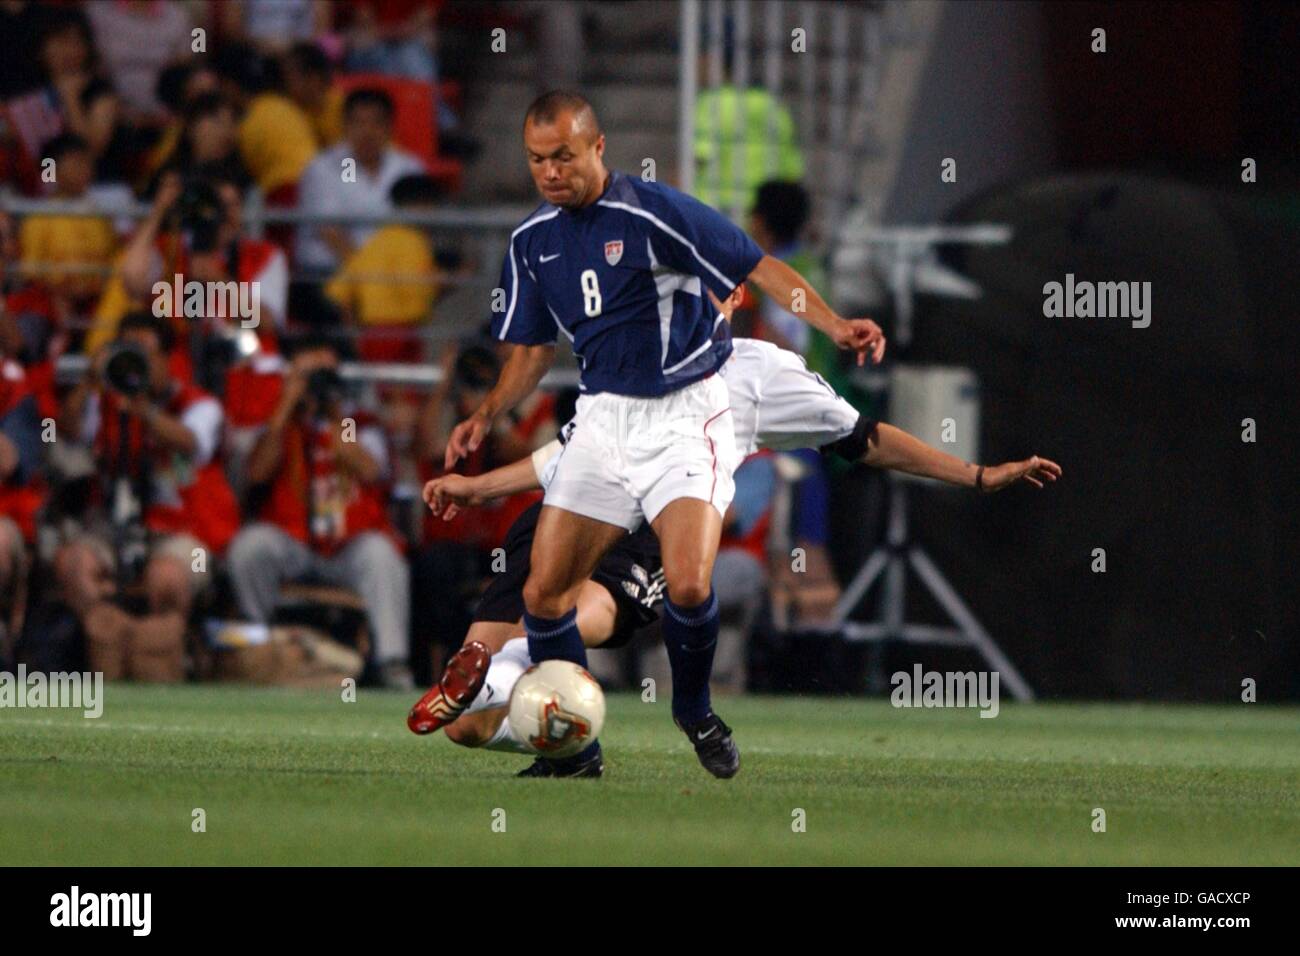 Soccer - FIFA World Cup 2002 - Quarter Final - Germany v USA. USA's Earnie Stewart is tackled from behind Stock Photo